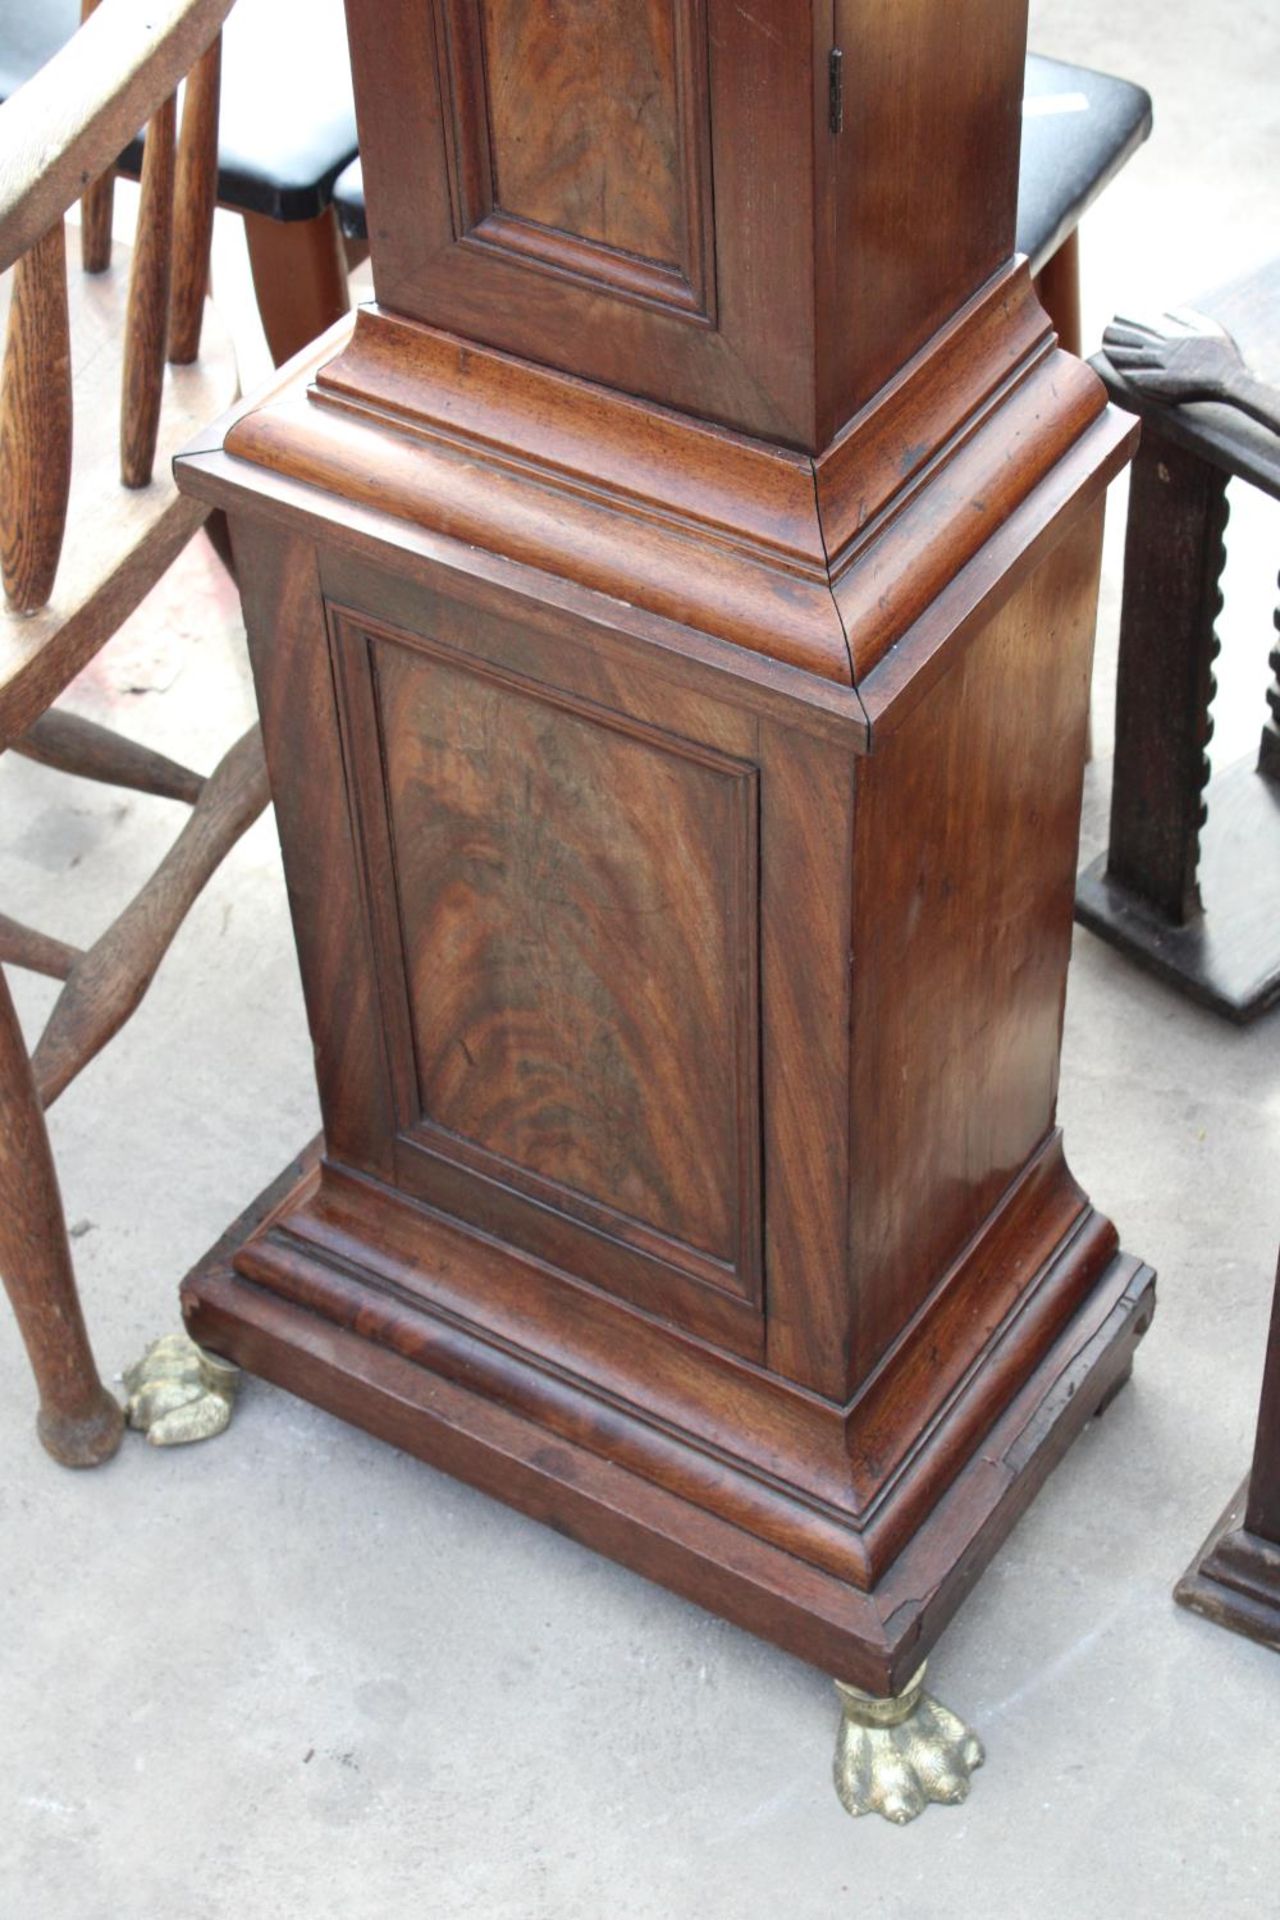 AN EARLY 20TH CENTURY MAHOGANY LONG CASE CLOCK WITH DOMED TOP ON FRONT BRASS CLAW FEET, 17" WIDE - Image 3 of 3